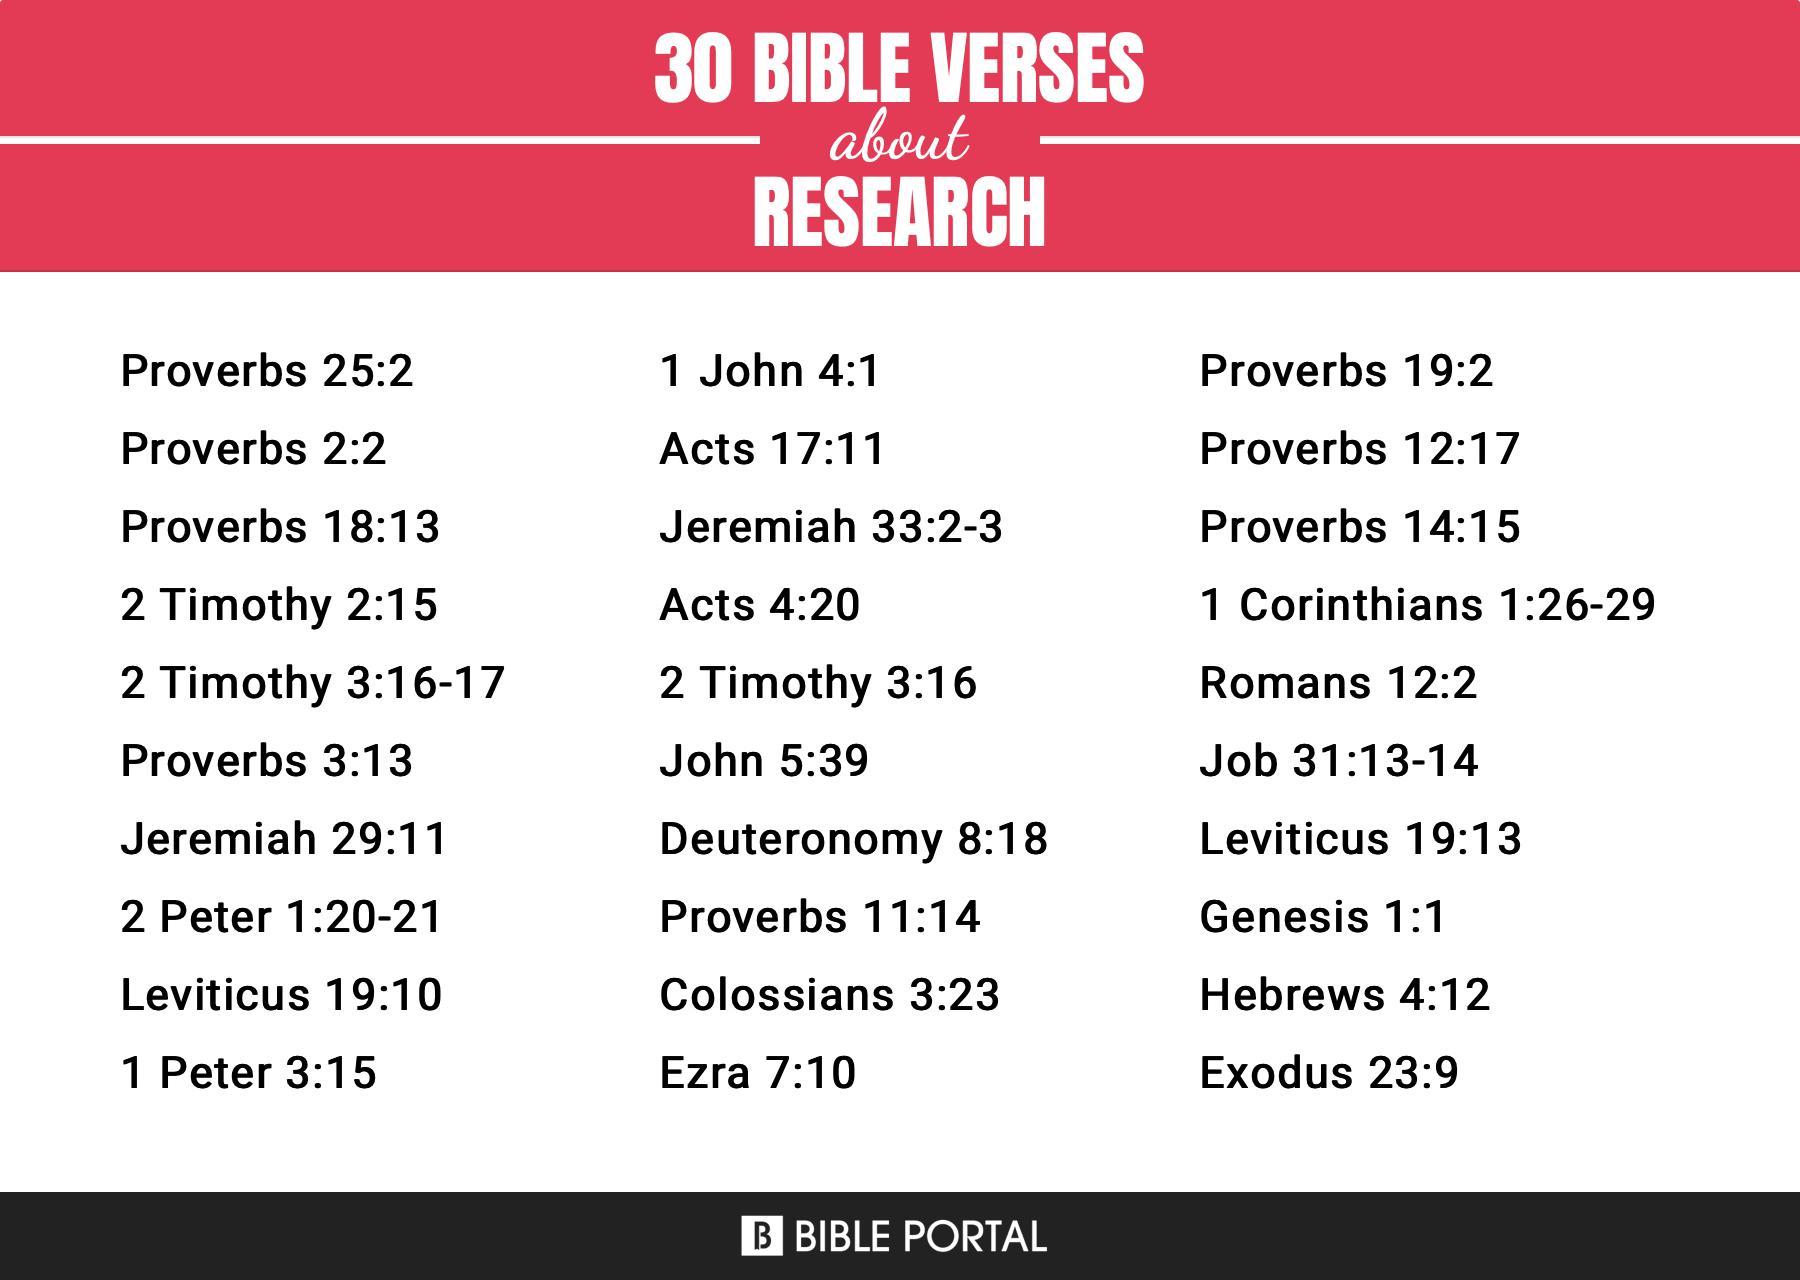 What Does the Bible Say about Research?